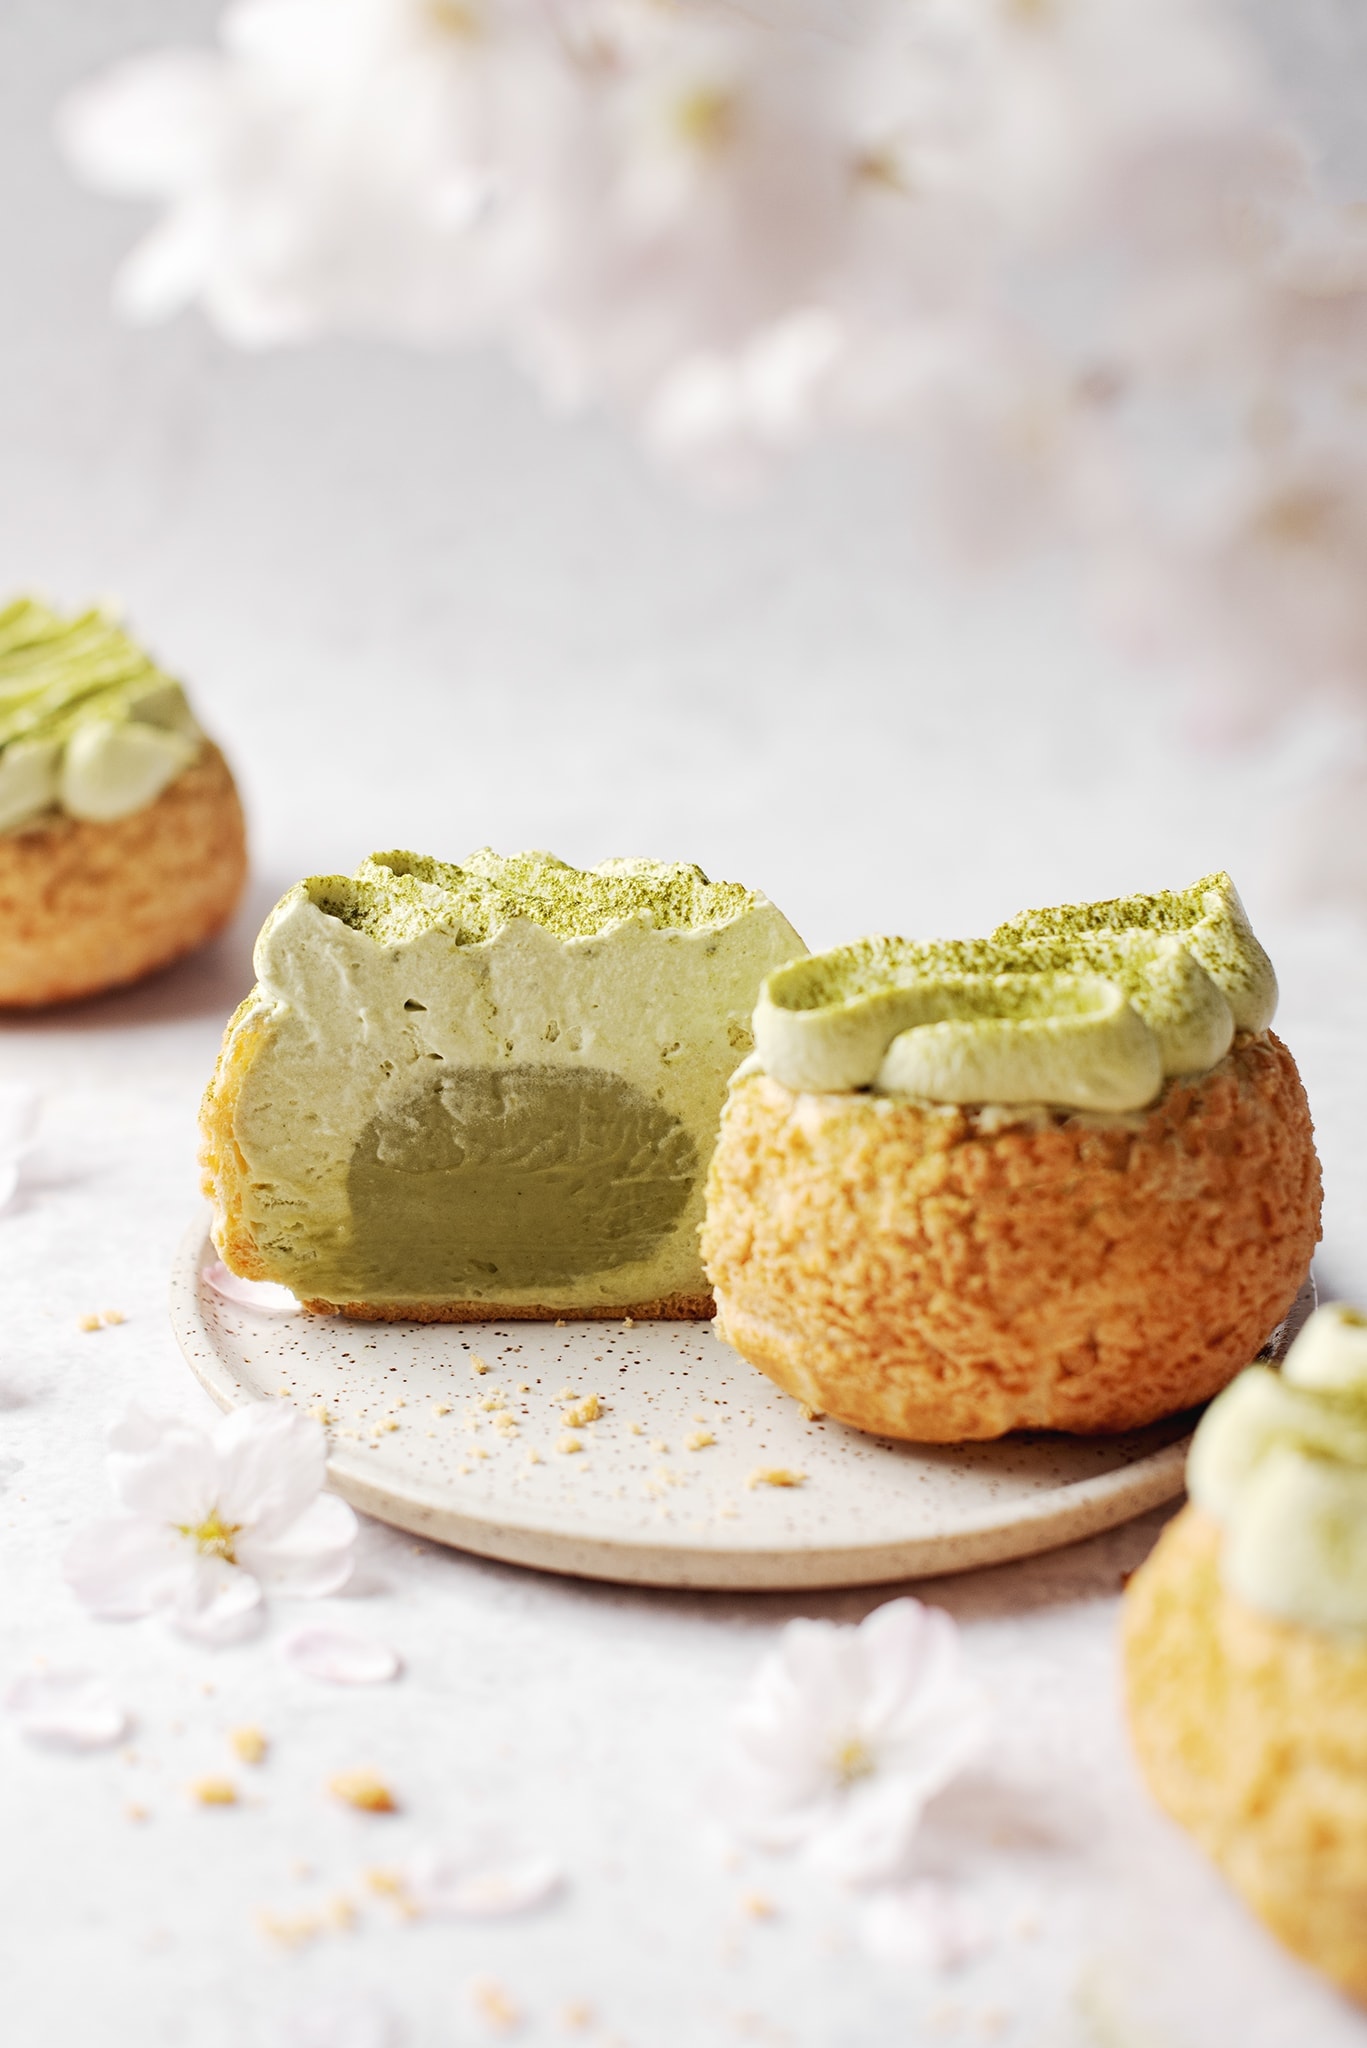 Cream puffs cut in half to show matcha pastry cream inside